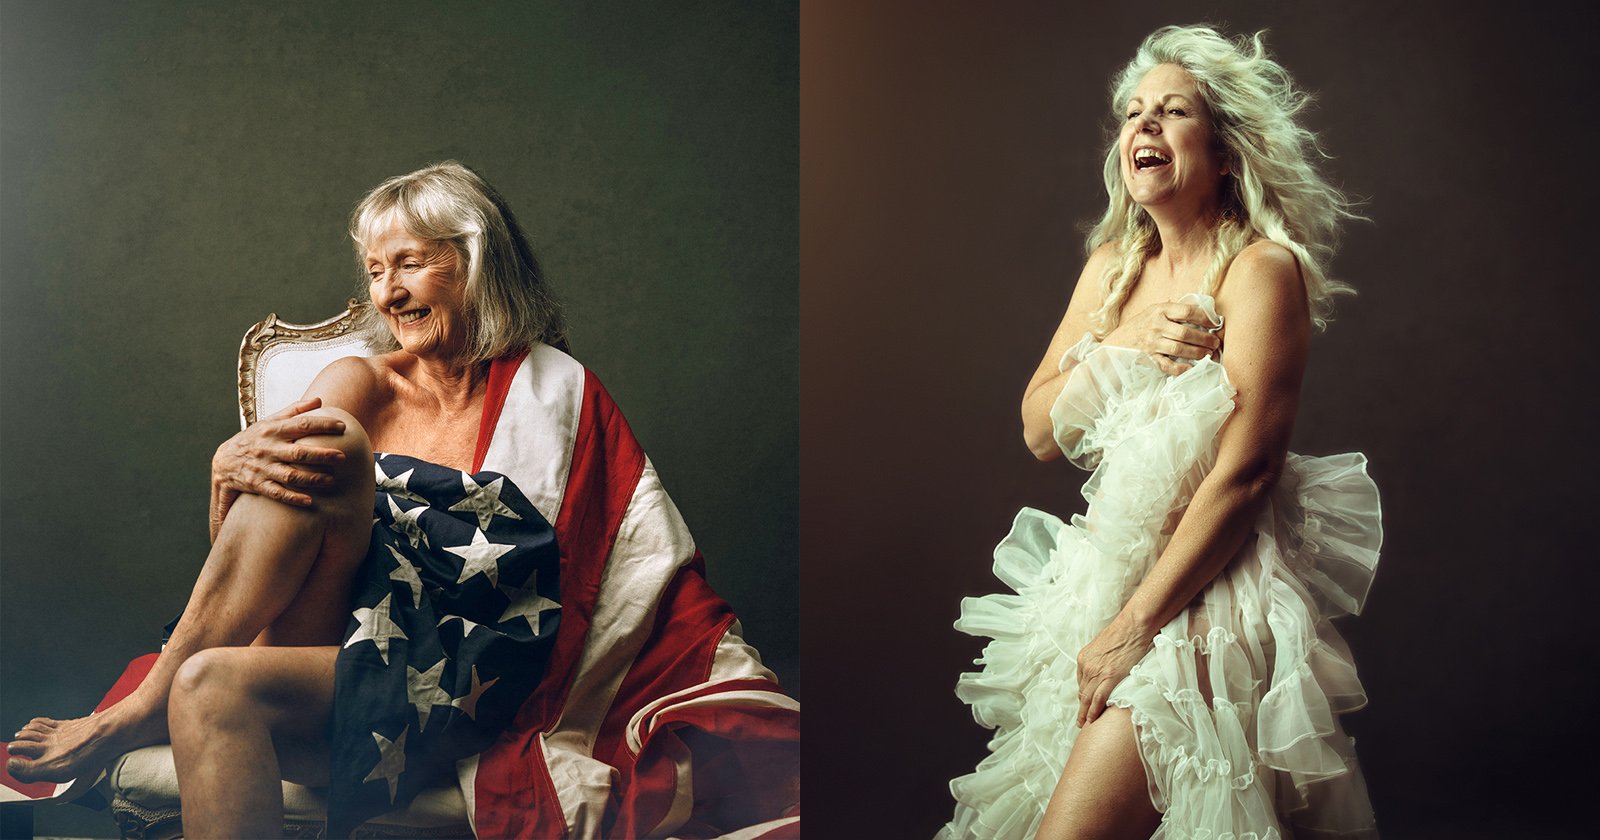 This Inspiring Portrait Series Captures the Beauty and Wisdom of Women Over 50